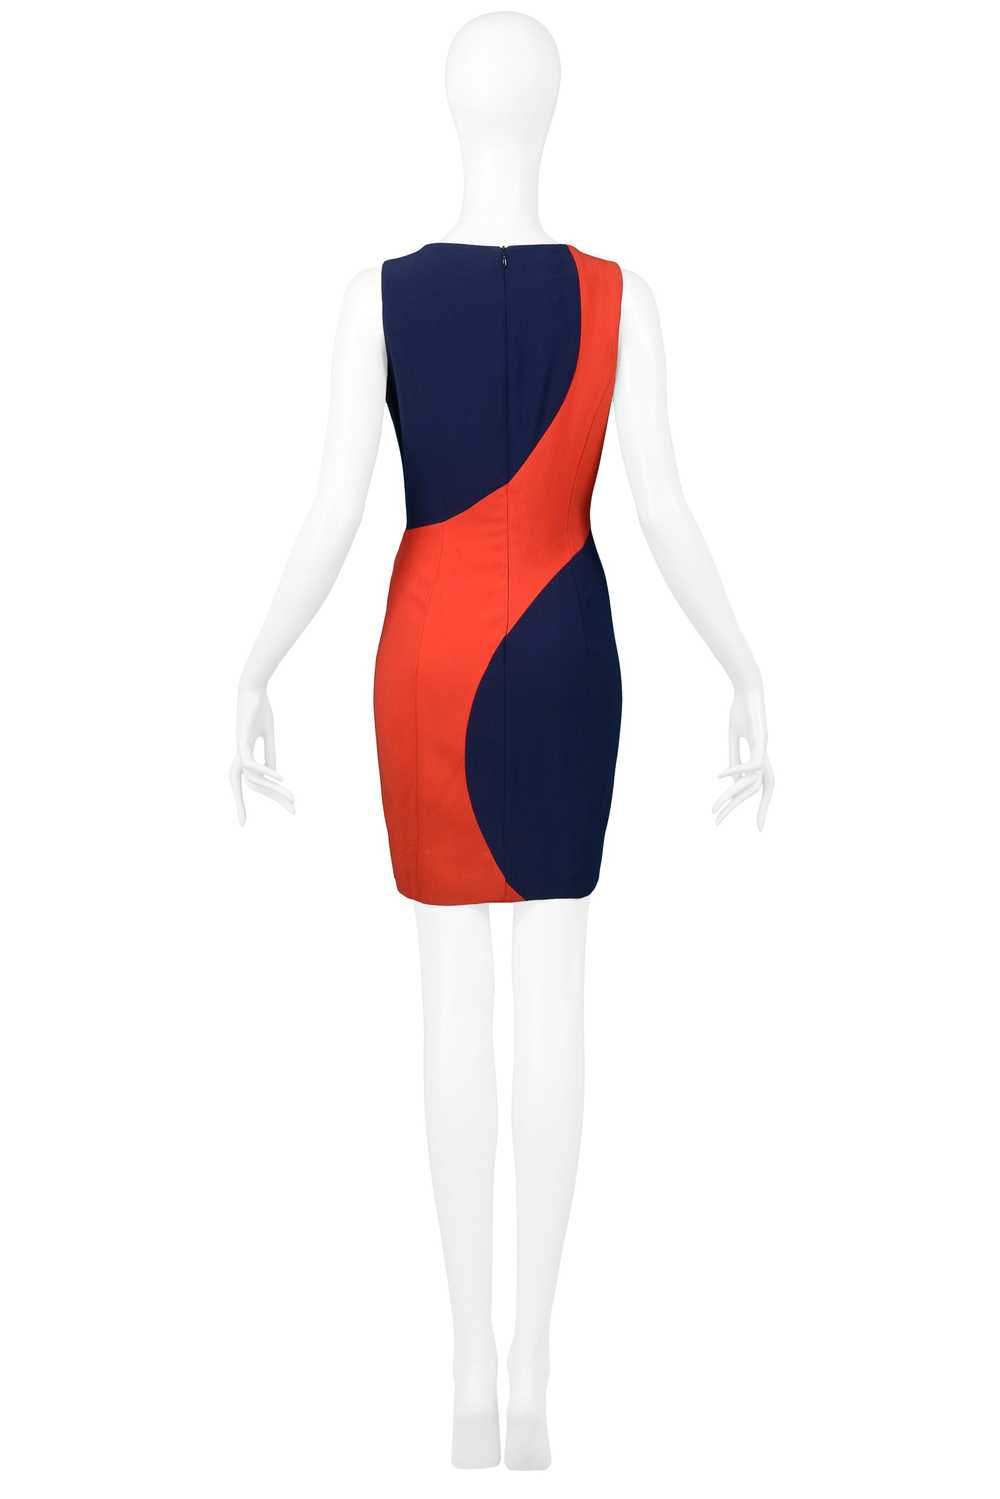 MOSCHINO COUTURE NAVY & RED BIG DOT DRESS - image 5